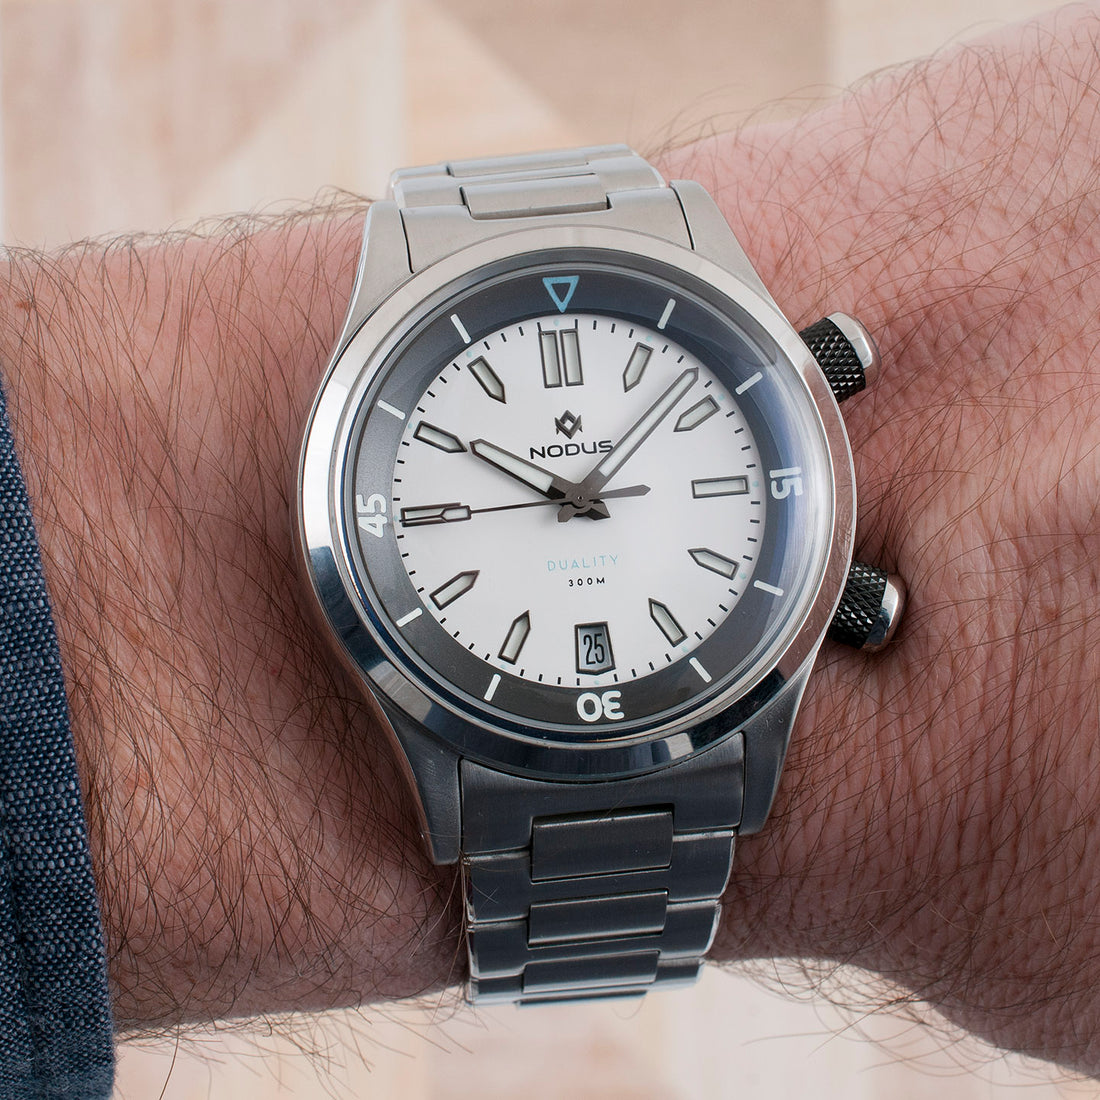 Nodus Duality Watch Review